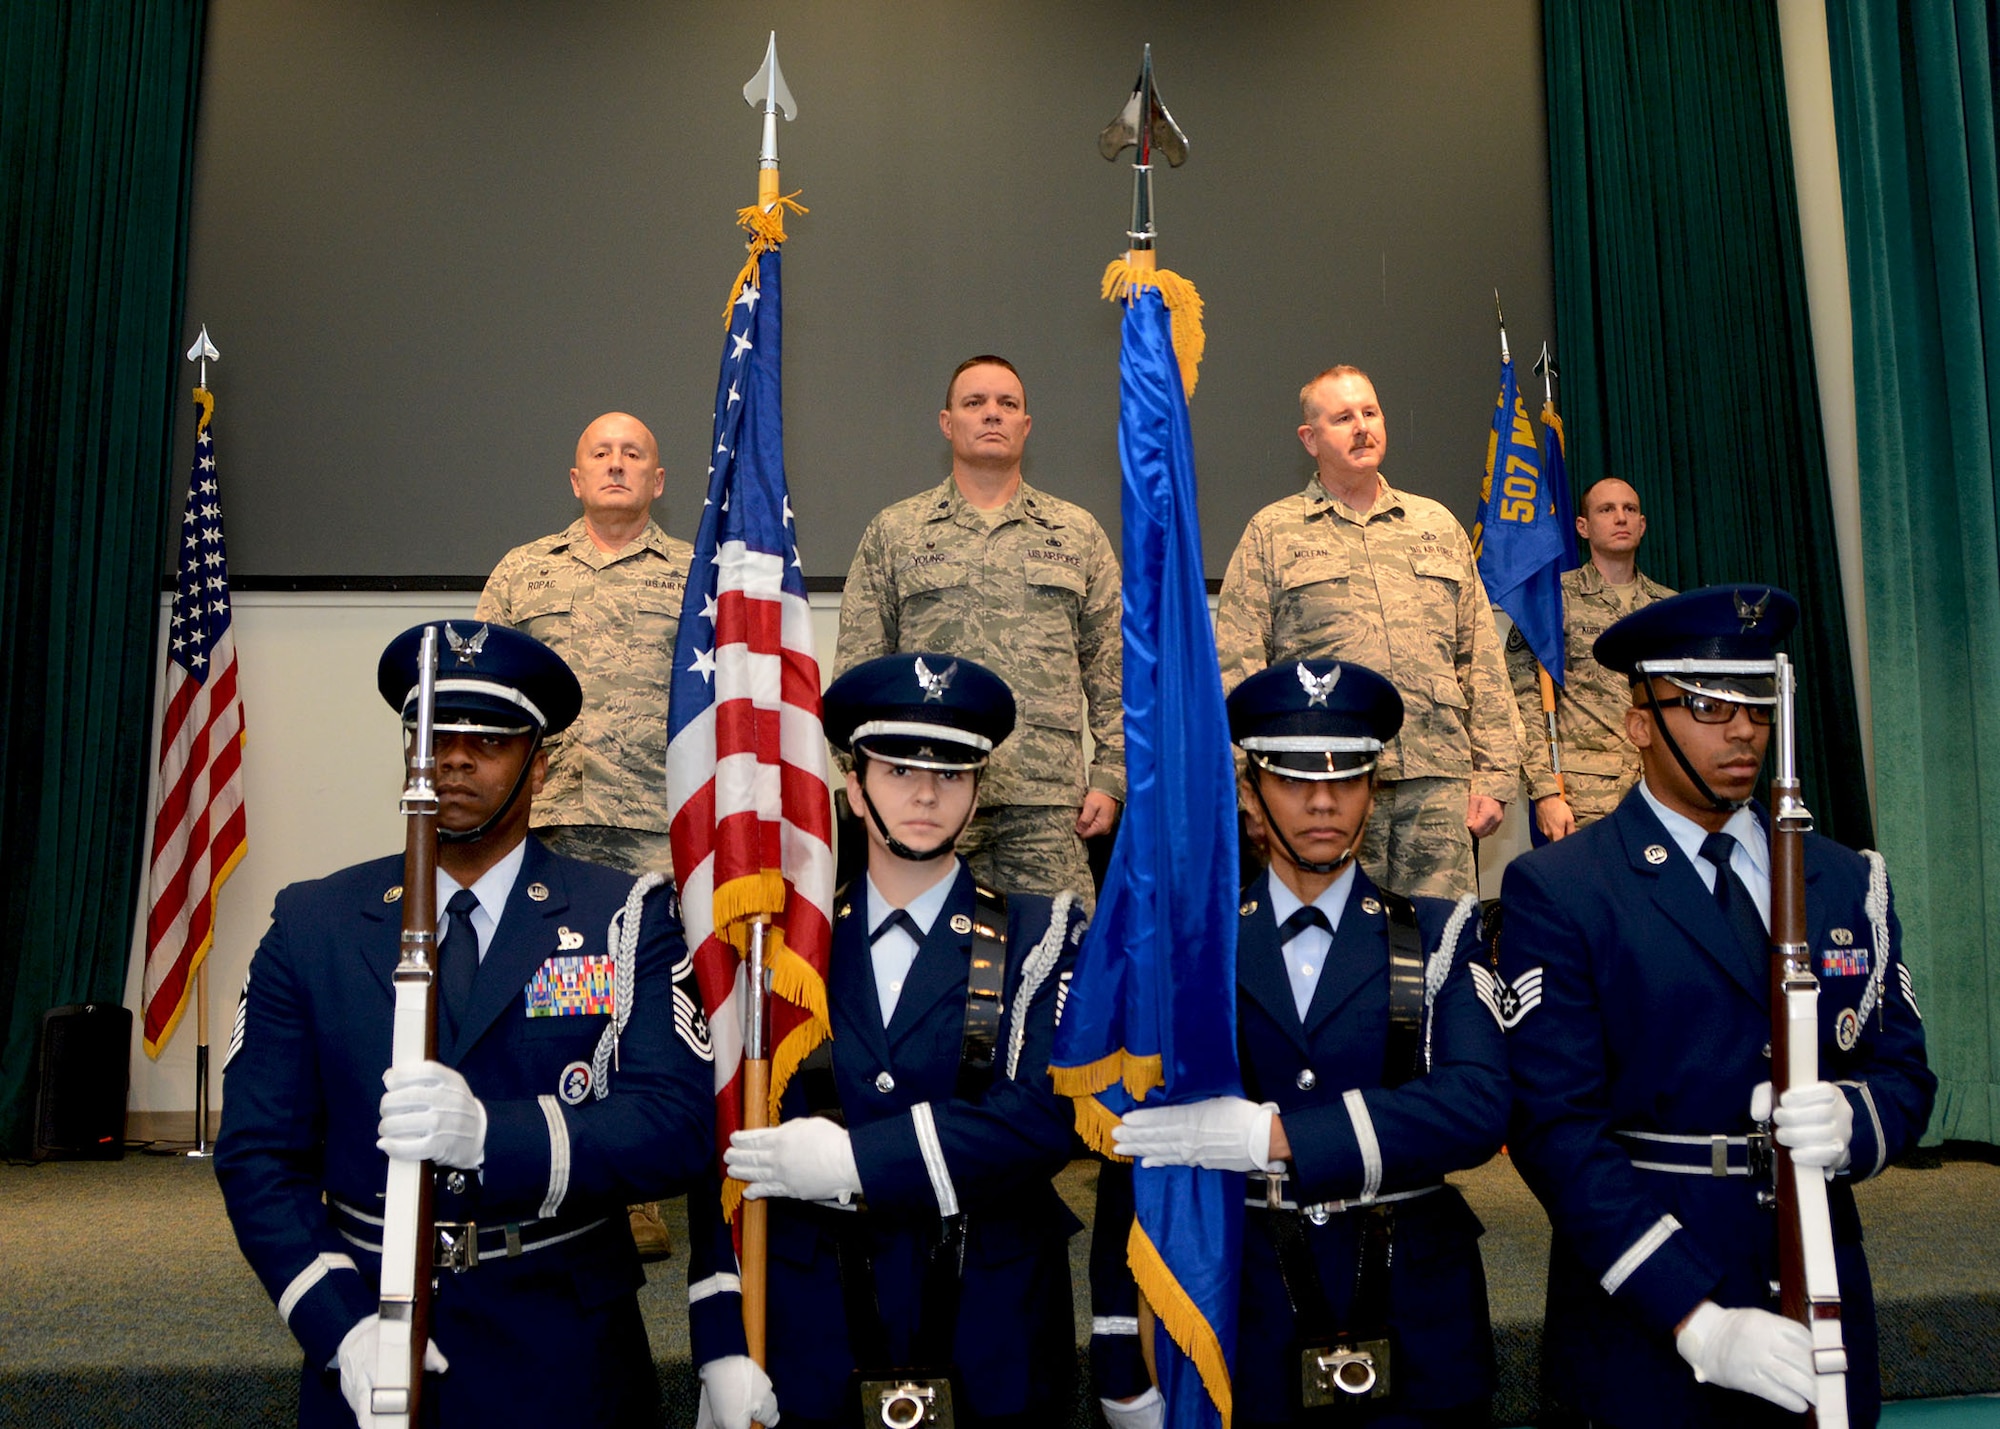 Reserve Citizen Airmen 507th Air Refueling Wing Honor Guard post the colors during the 72nd Aerial Port Squadron change of command ceremony at Tinker Air Force Base, Oklahoma. (U.S. Air Force photo by Tech. Sgt. Samantha Mathison)